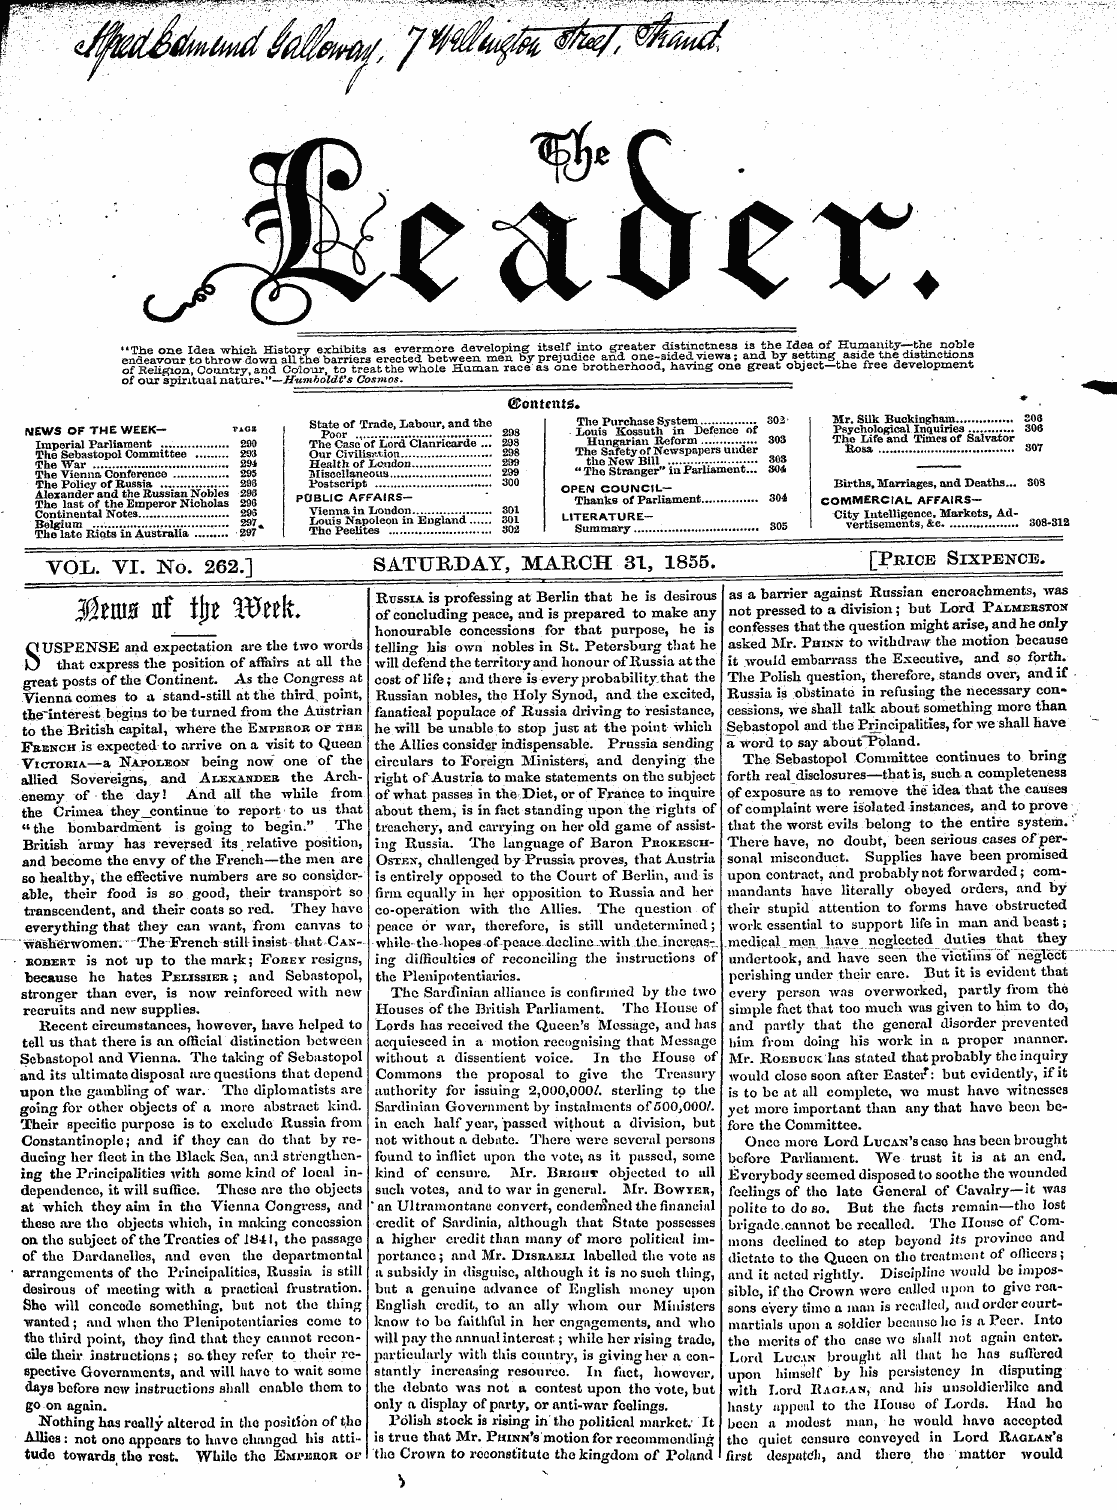 Leader (1850-1860): jS F Y, 2nd edition - ©On Tents. ?